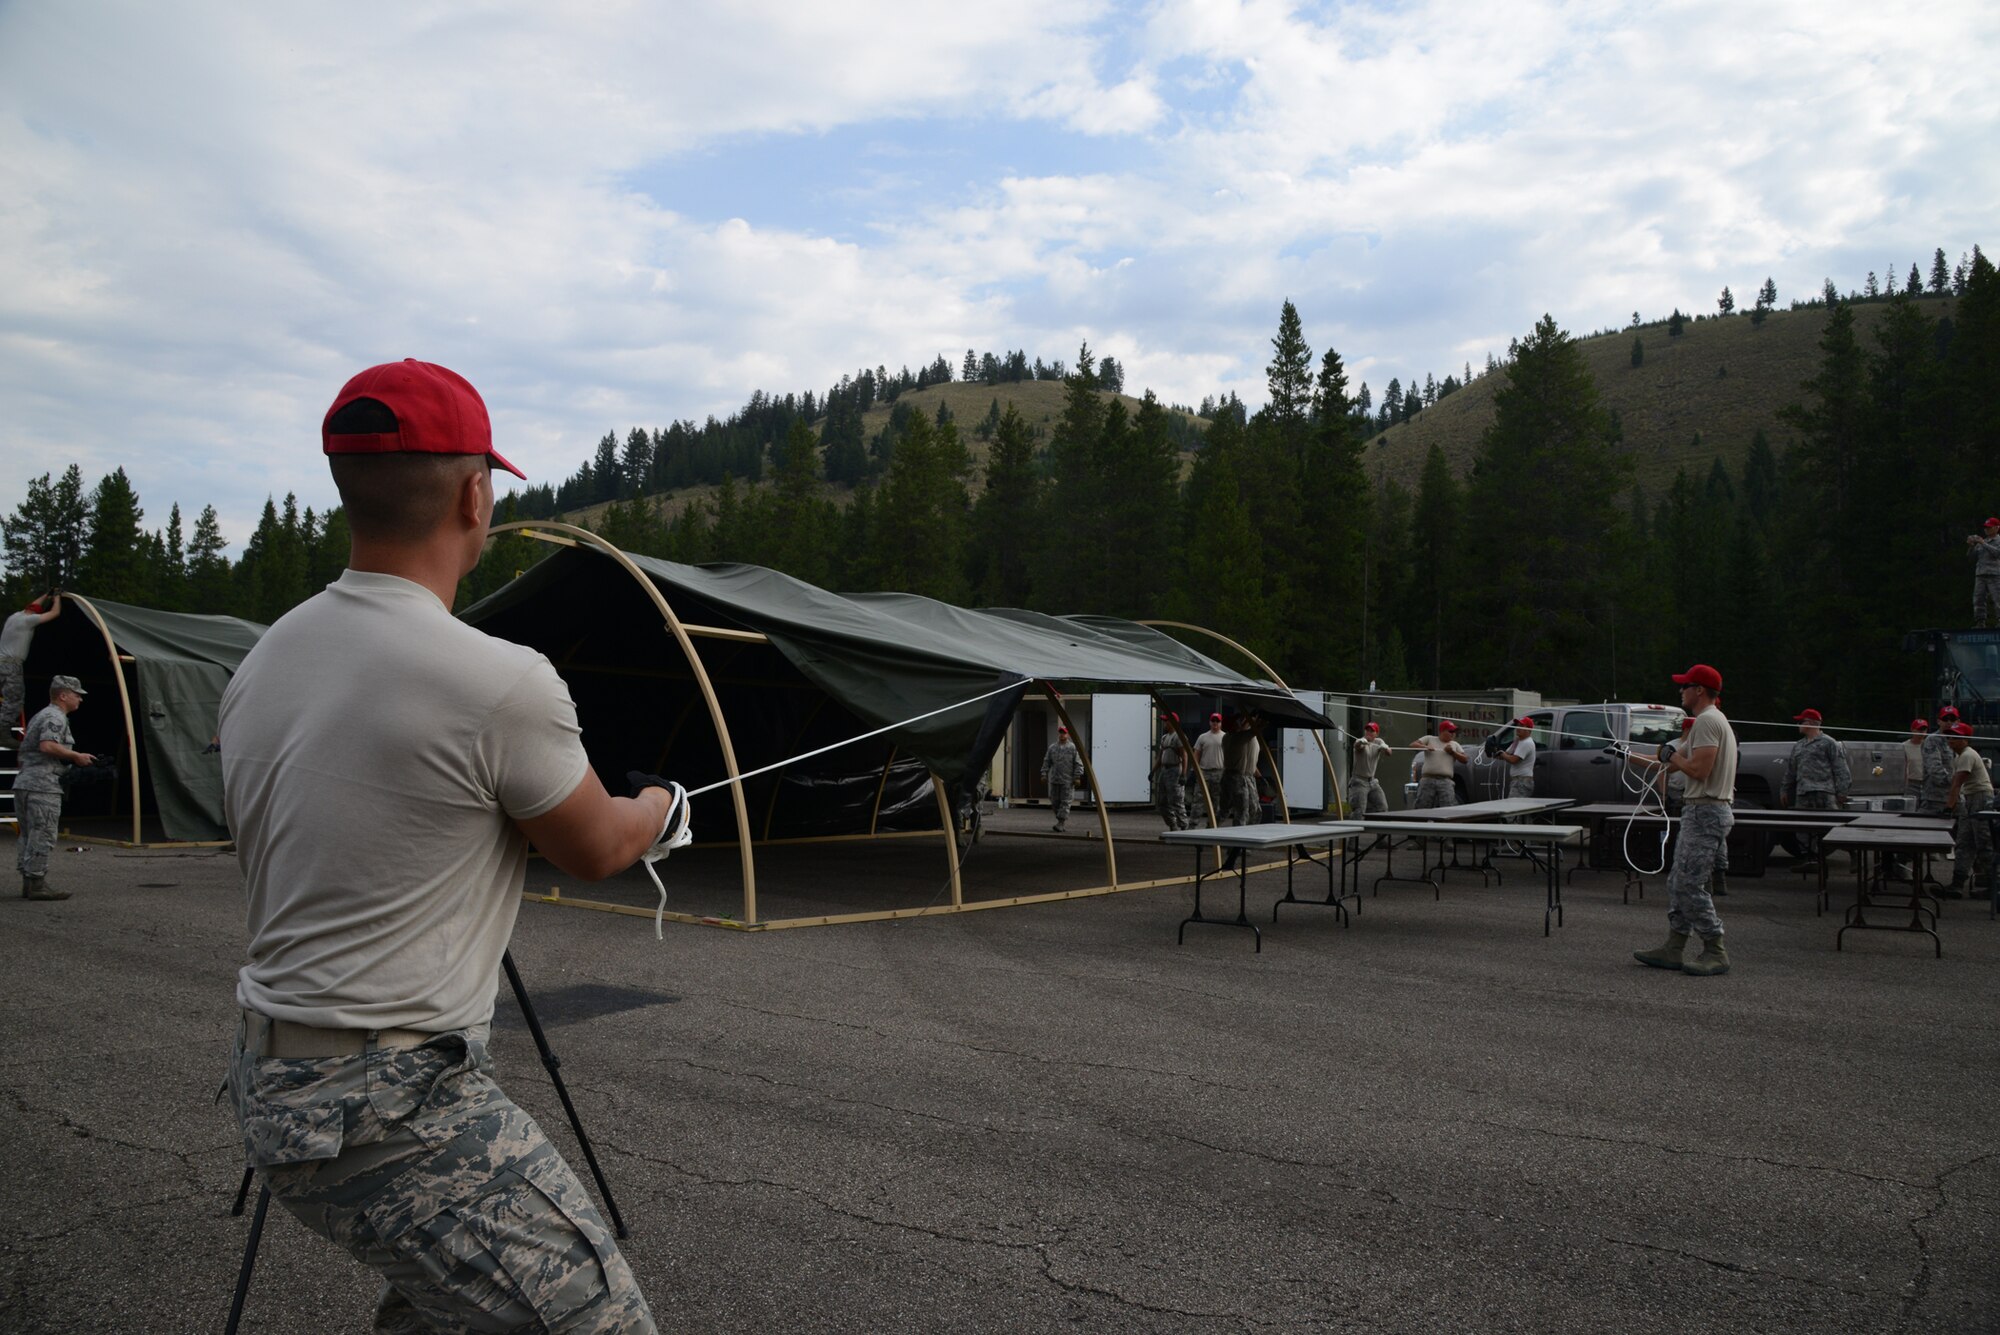 Airmen from the 819th RED HORSE Squadron pull tent fabric to cover an Alaskan small system shelter during an exercise July 27, 2017, at the Benchmark Airport near Augusta, Mont.